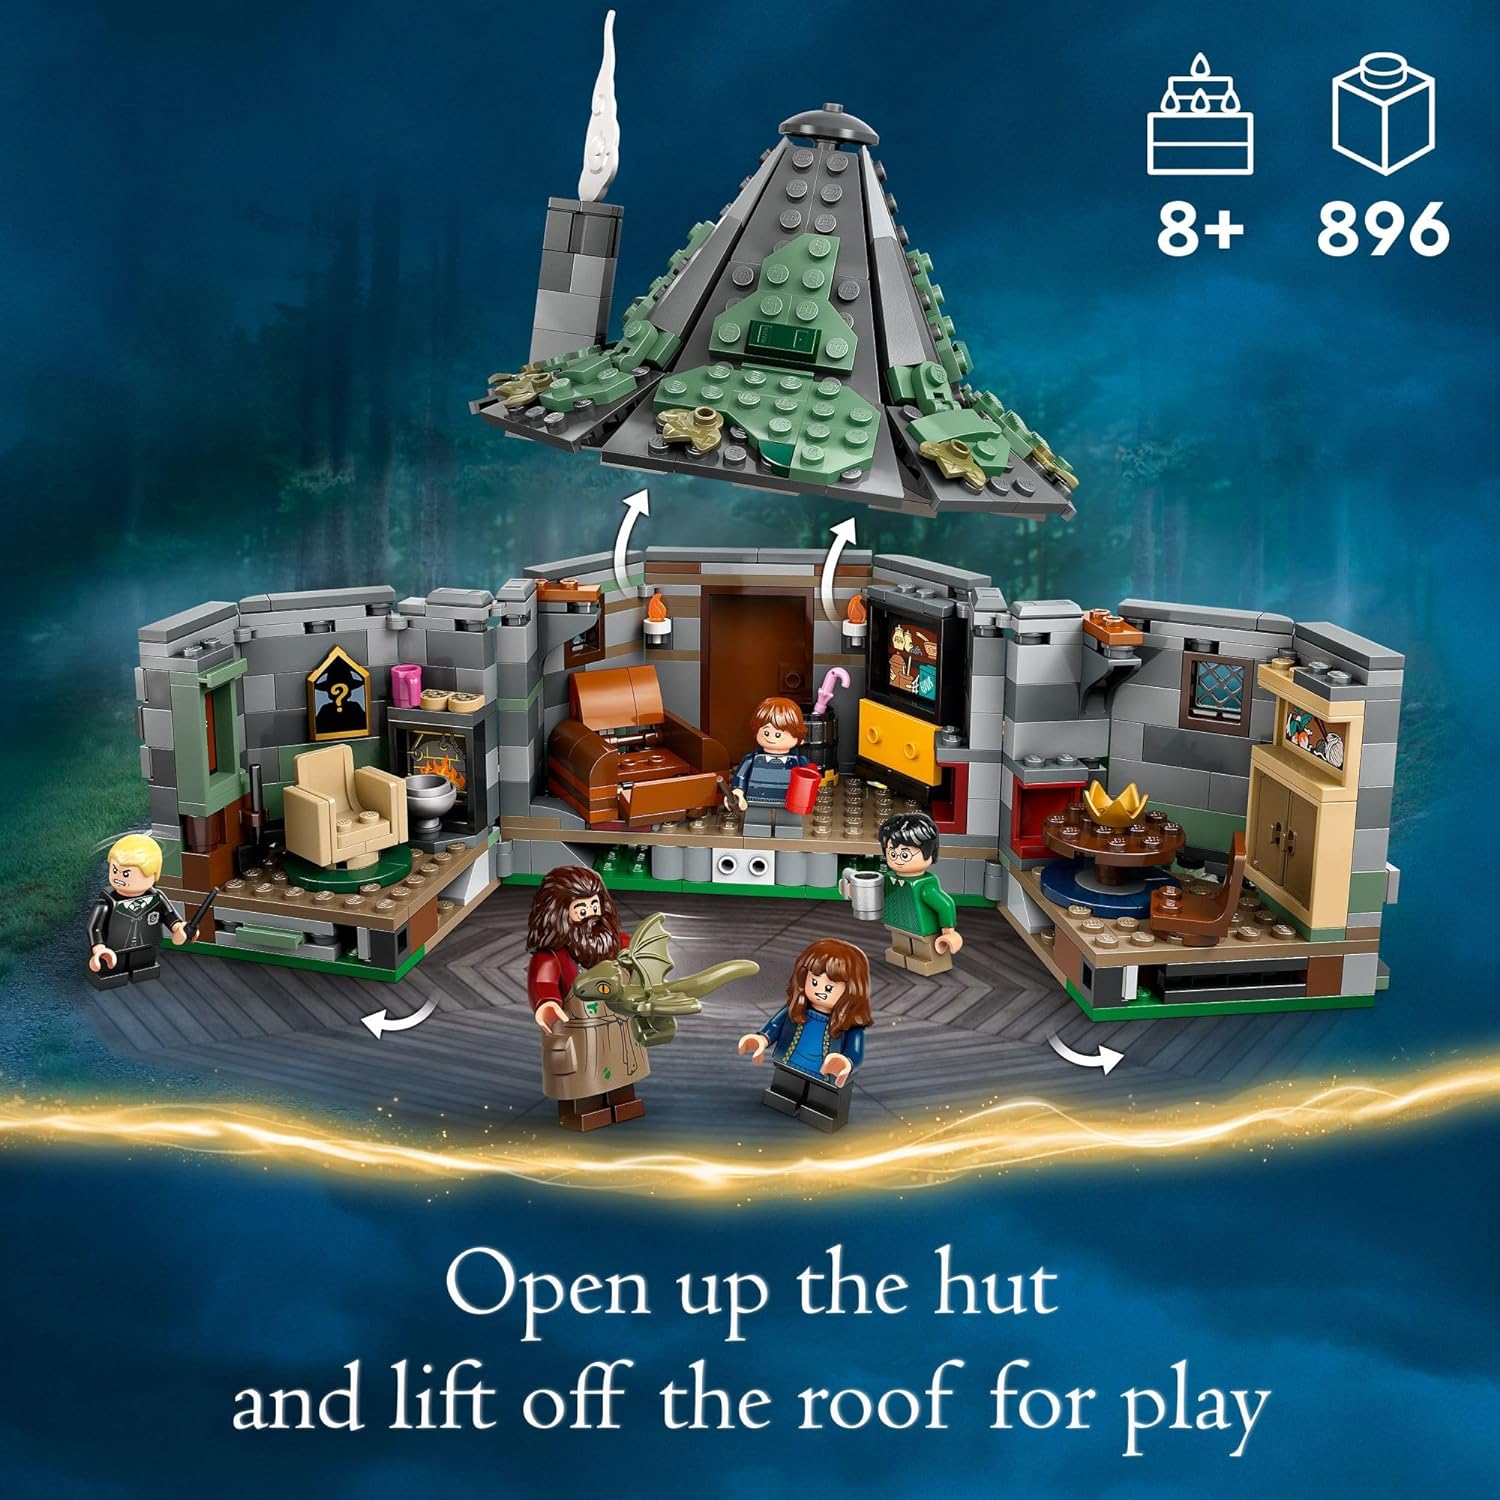 LEGO 76428 Harry Potter Hagrid’s Hut: An Unexpected Visit, Harry Potter Toy with 7 Characters and a Dragon for Magical Role Play, Buildable House Toy.